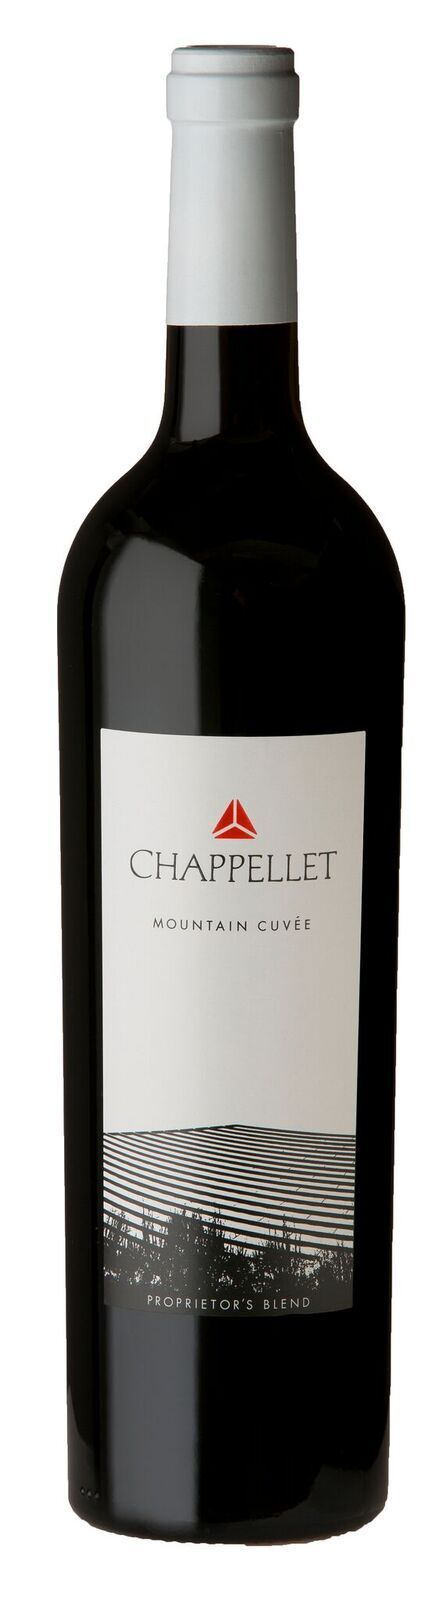 International Red Blend Chappellet 2016 Mountain Cuvée Proprietor's Red, Napa Valley